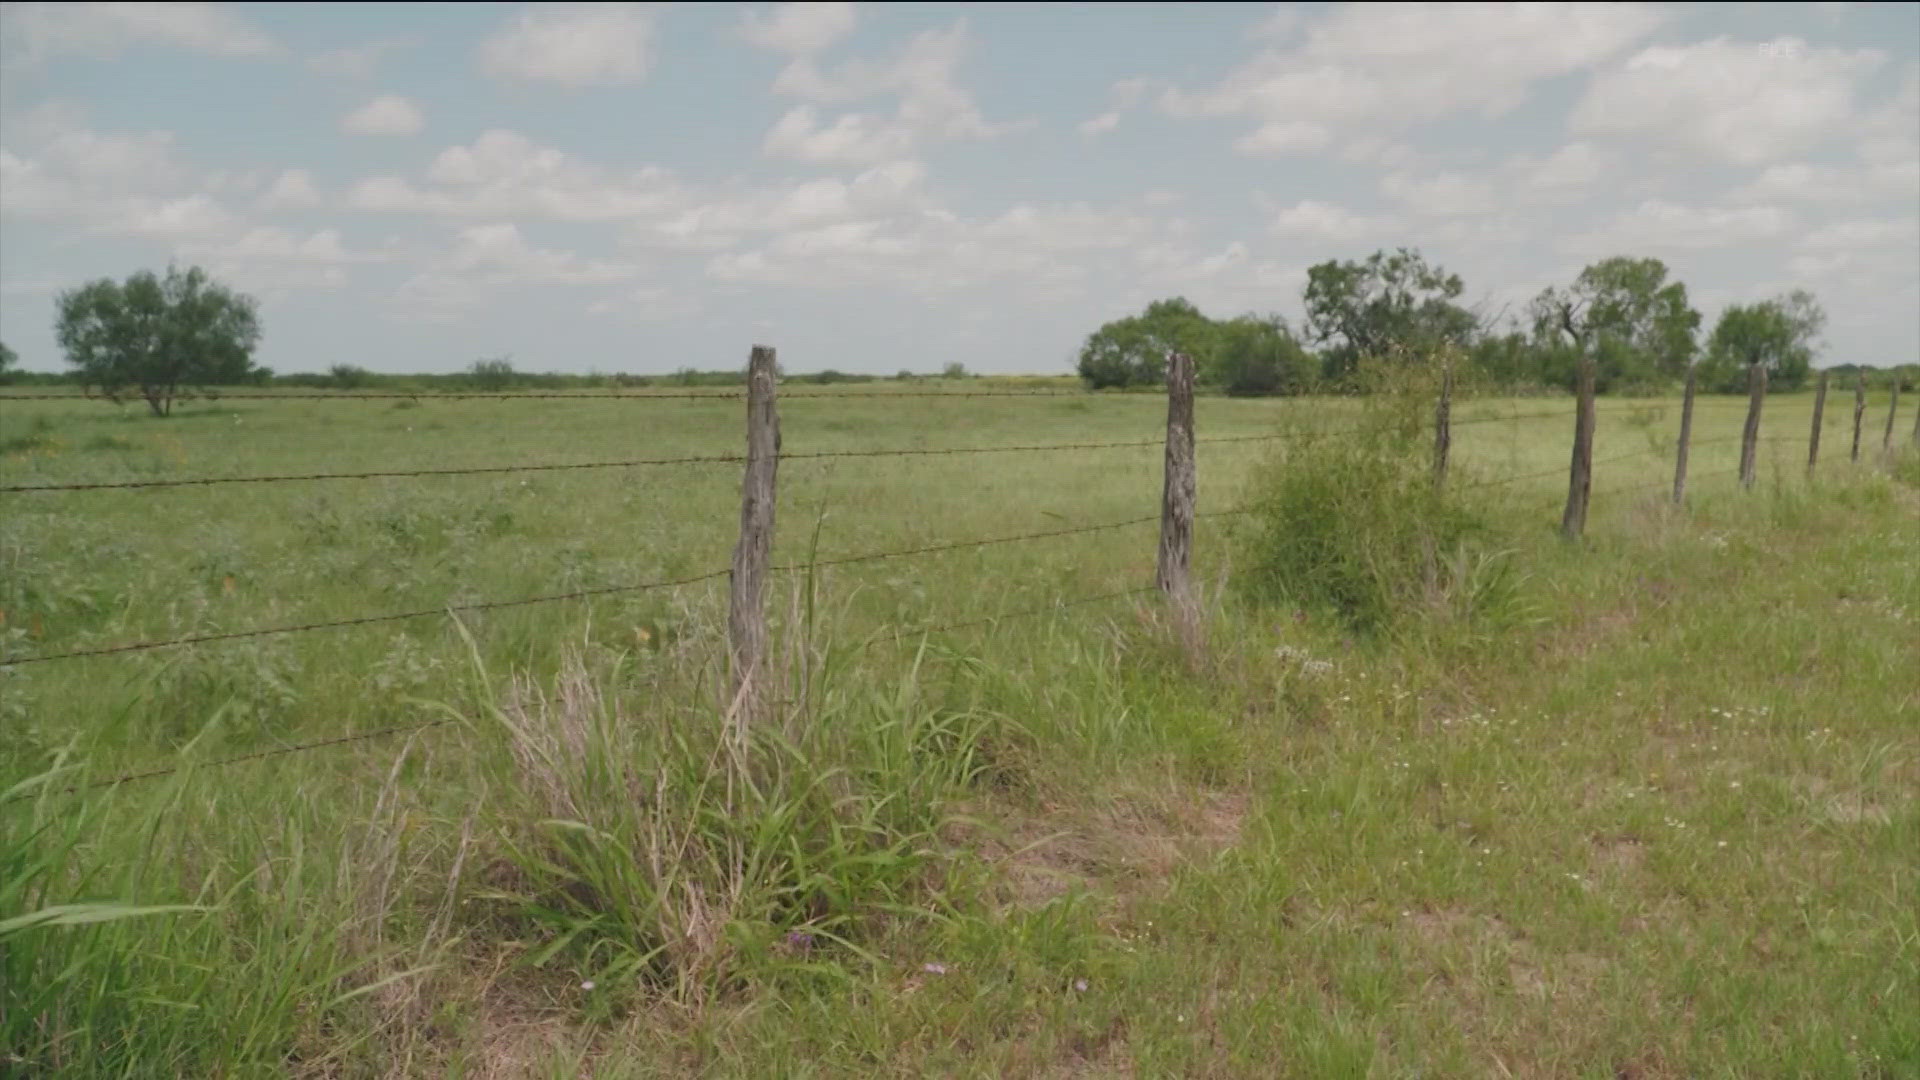 If someone illegally crosses the border and damages property on agricultural land, owners can report it and get up to $75,000 to help with repairs.